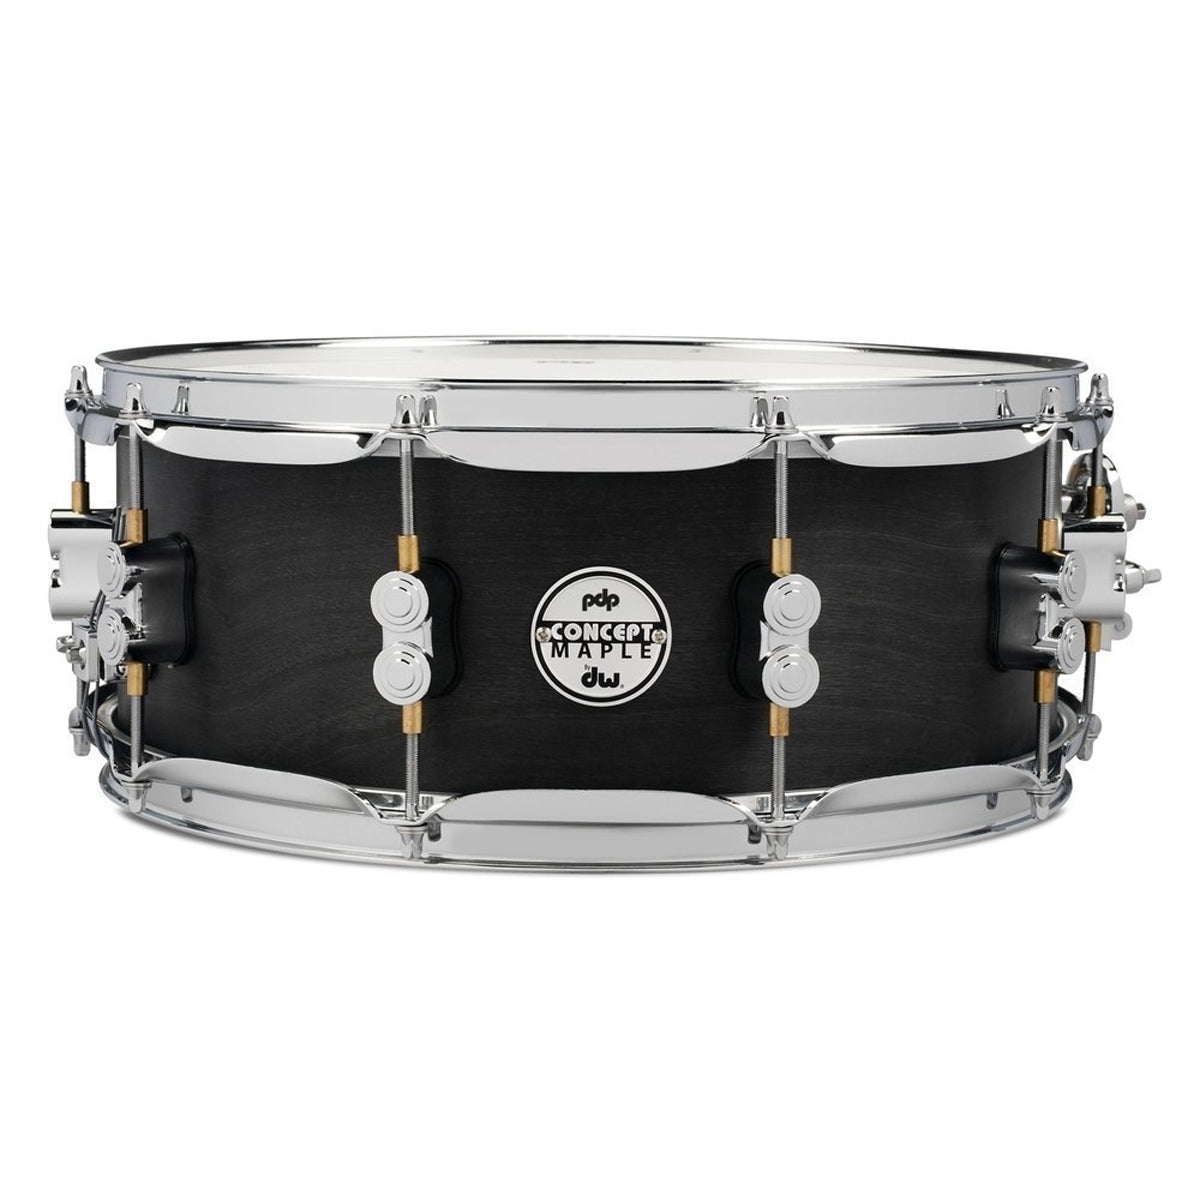 PDP by DW Concept Black Wax 14"x5.5" Maple Snare Drum